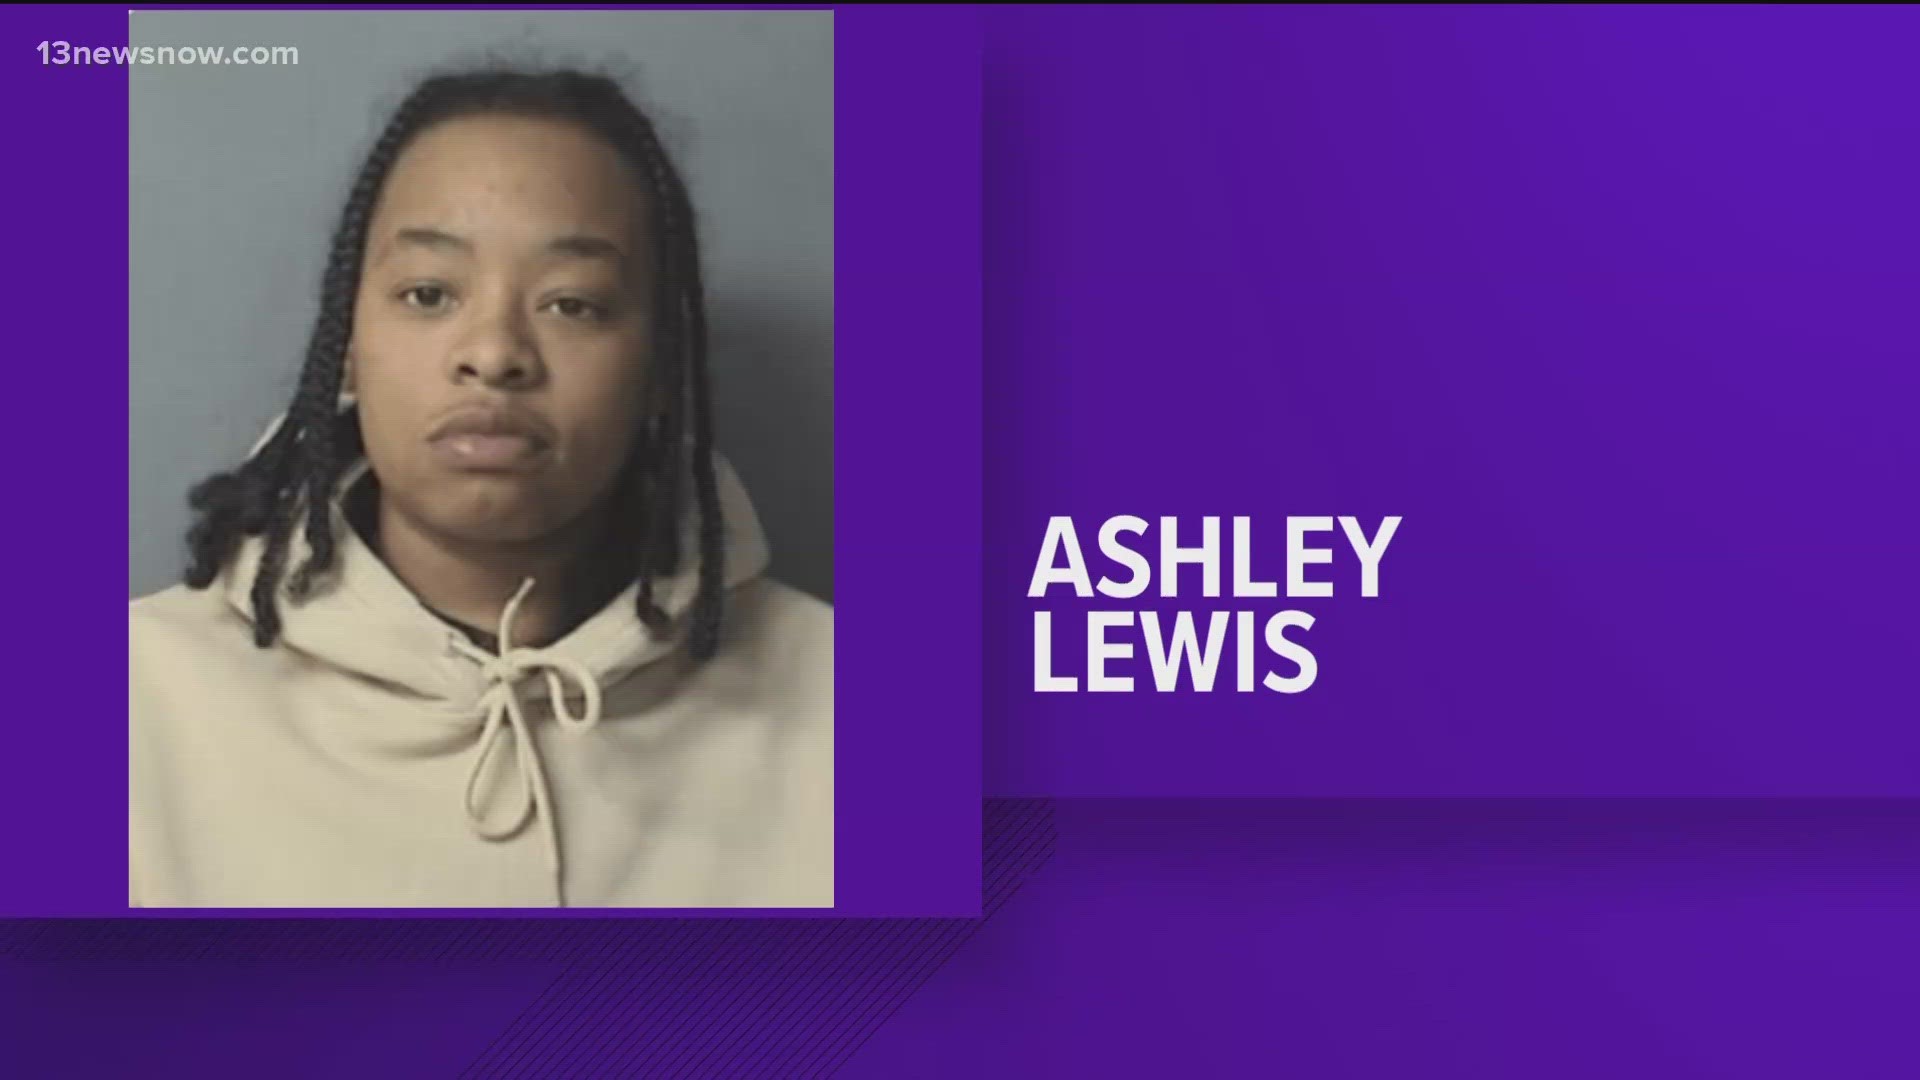 Norfolk police said 26-year-old Ashley Lewis is suspected of shooting a woman Sunday morning.